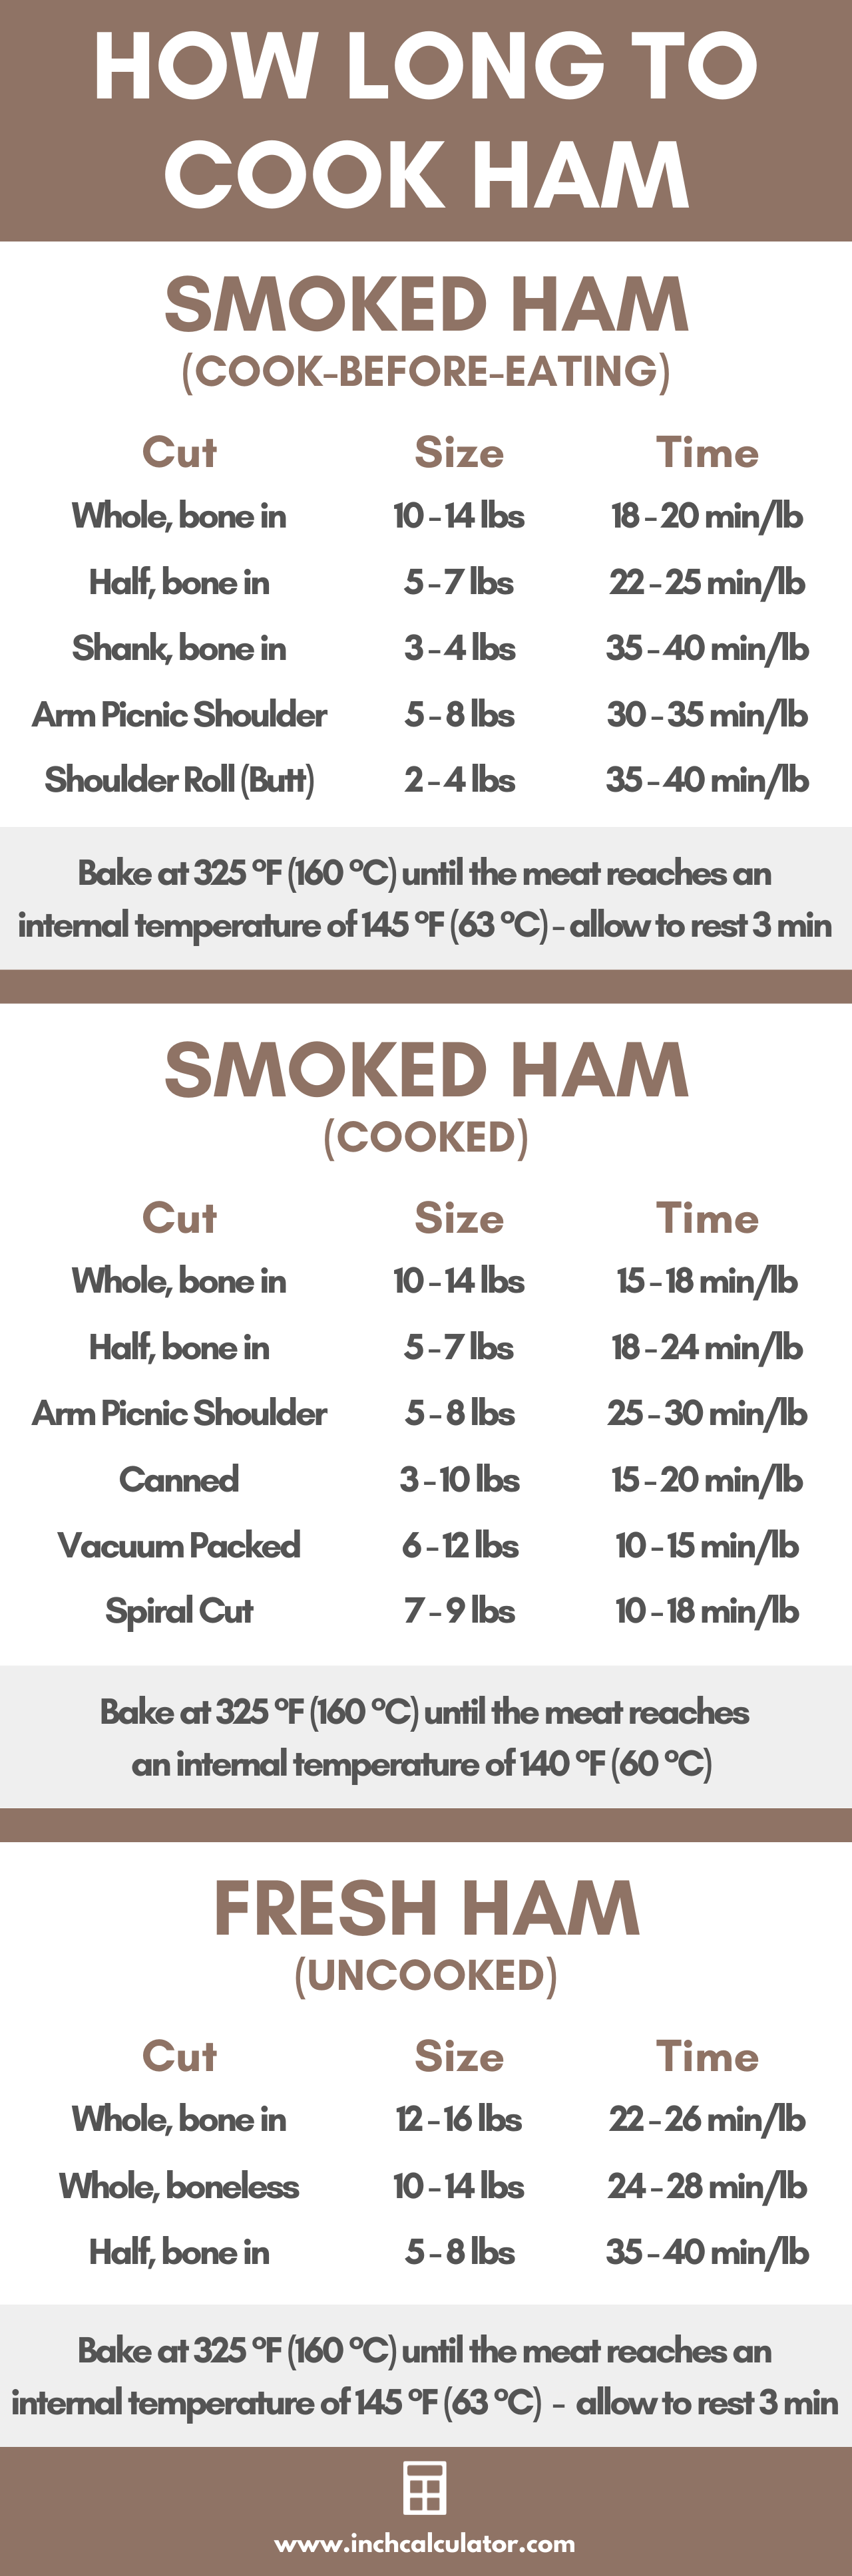 Chart of cooking times for various cuts of ham, per the USDA